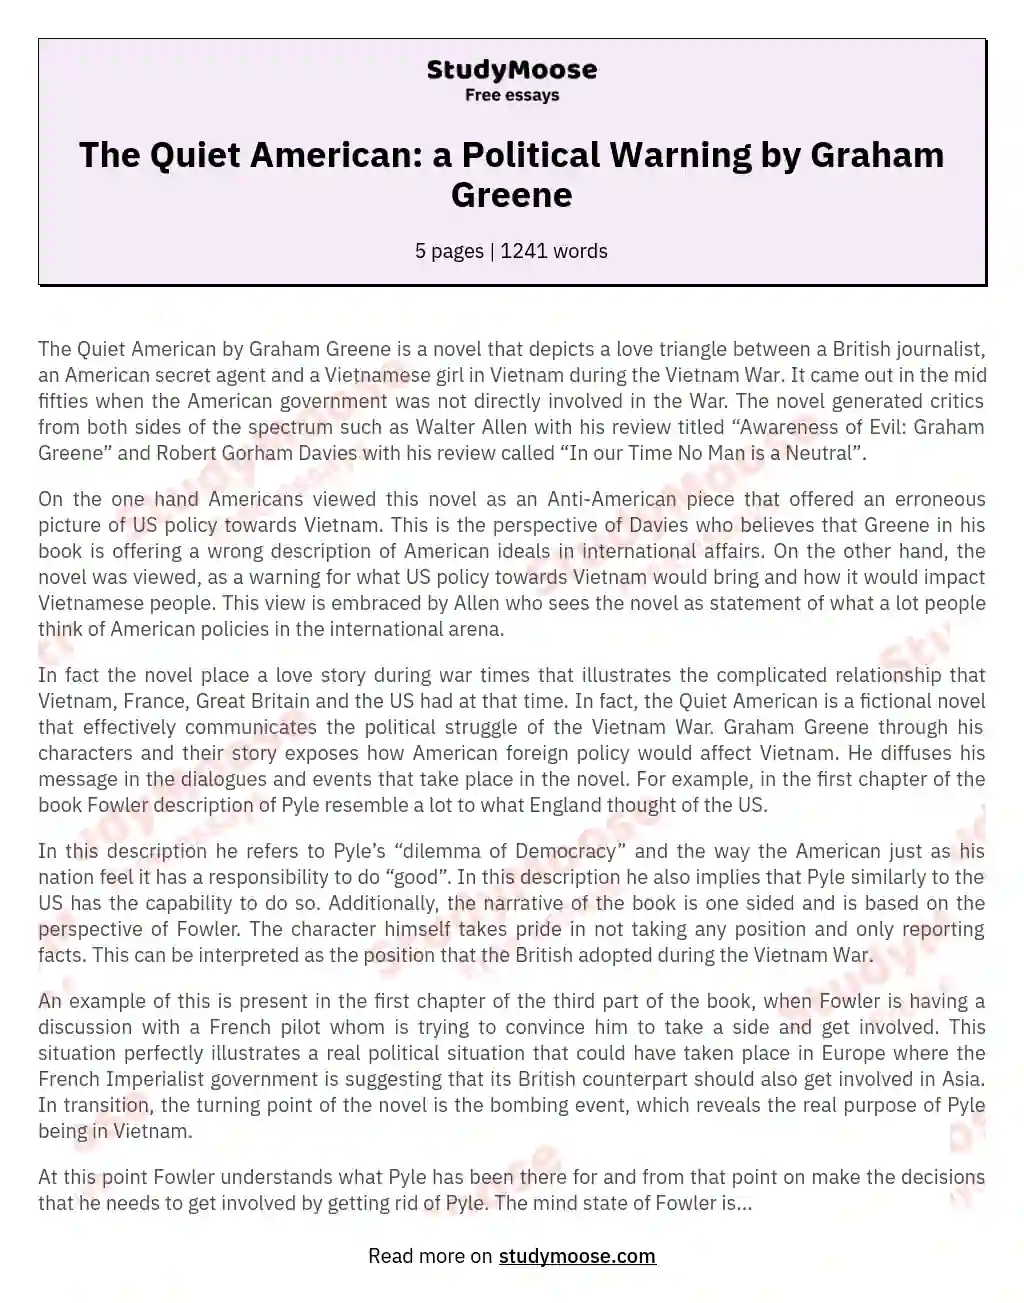 The Quiet American: a Political Warning by Graham Greene essay